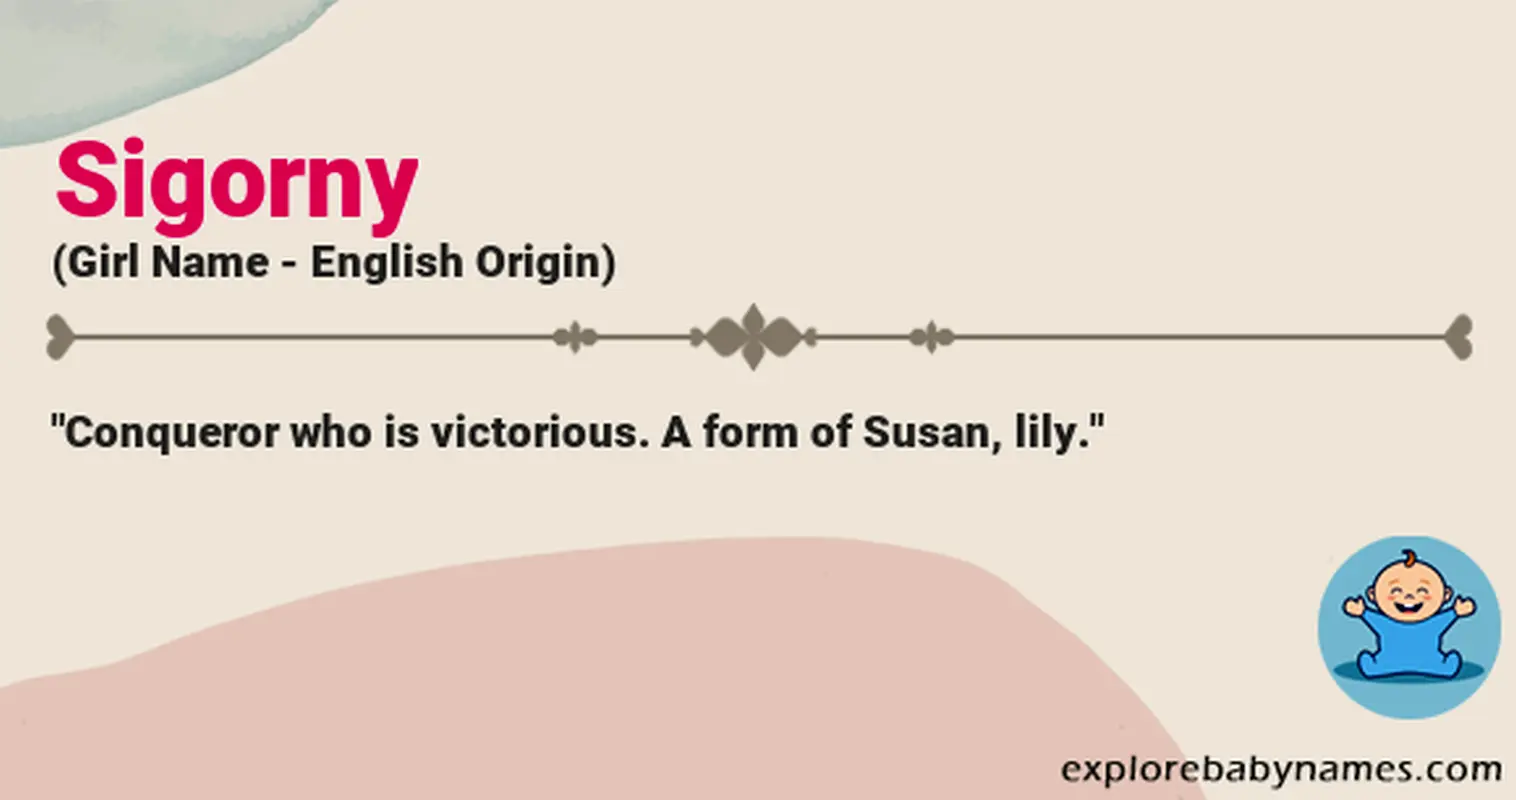 Meaning of Sigorny